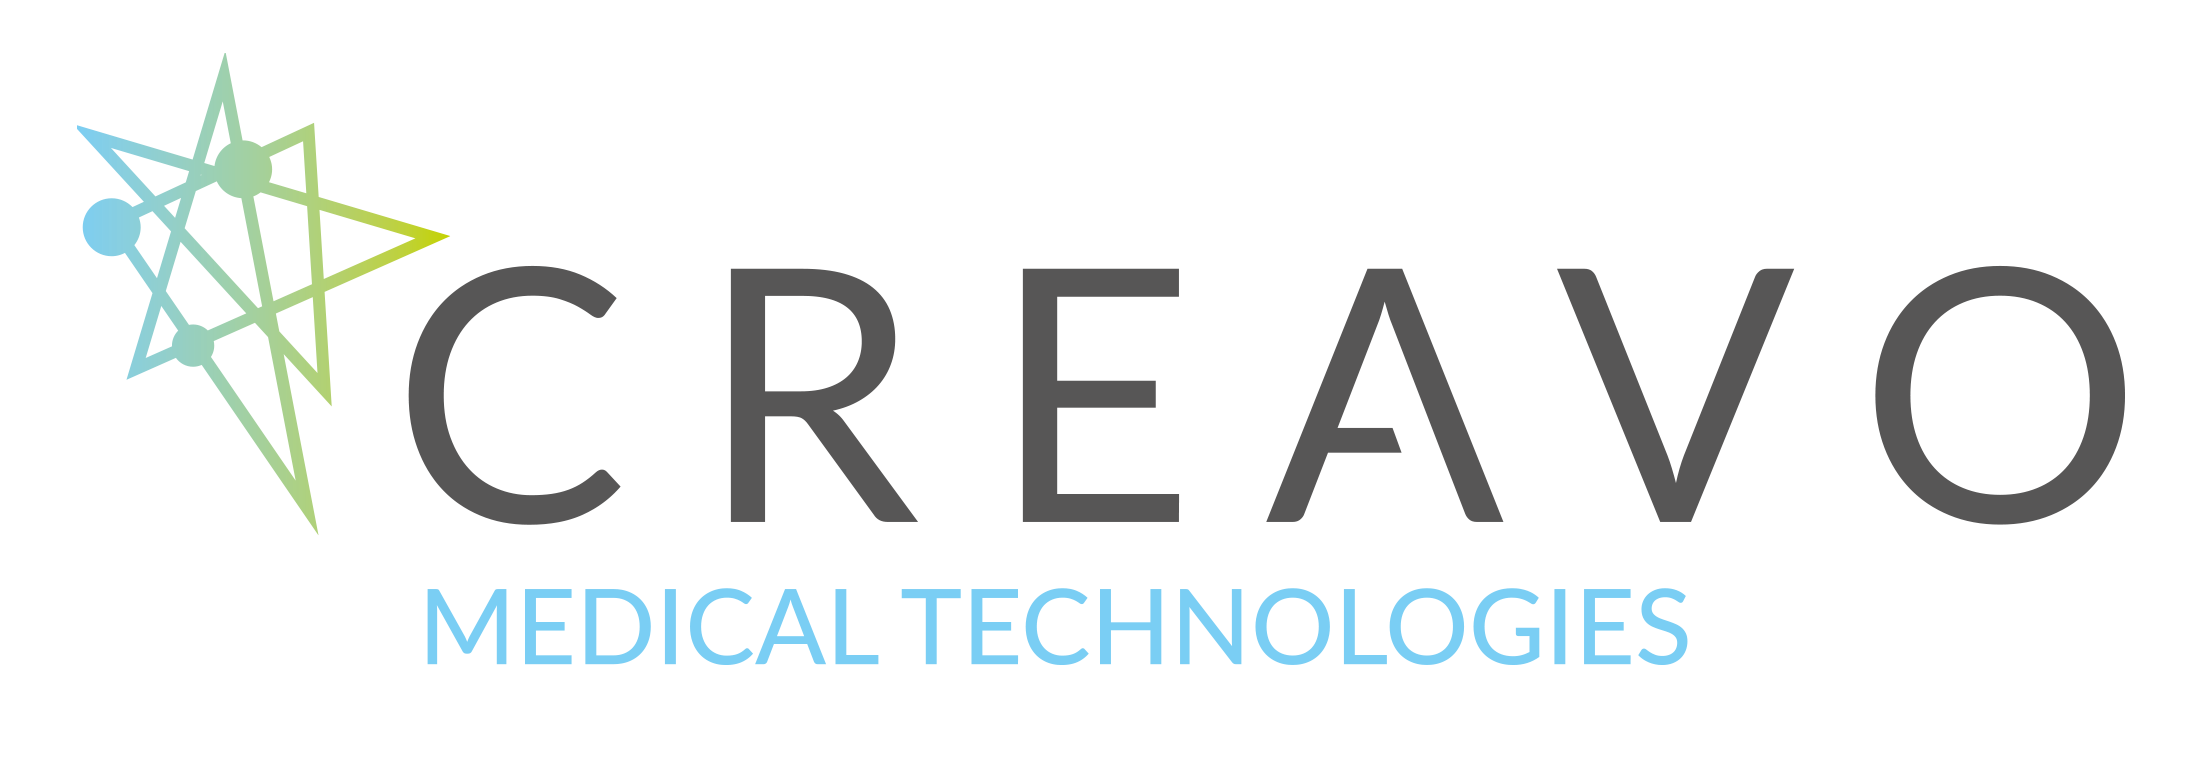 Creavo Medical Technologies secures U.S. FDA 510(k) approval for ground-breaking rule-out scanning device